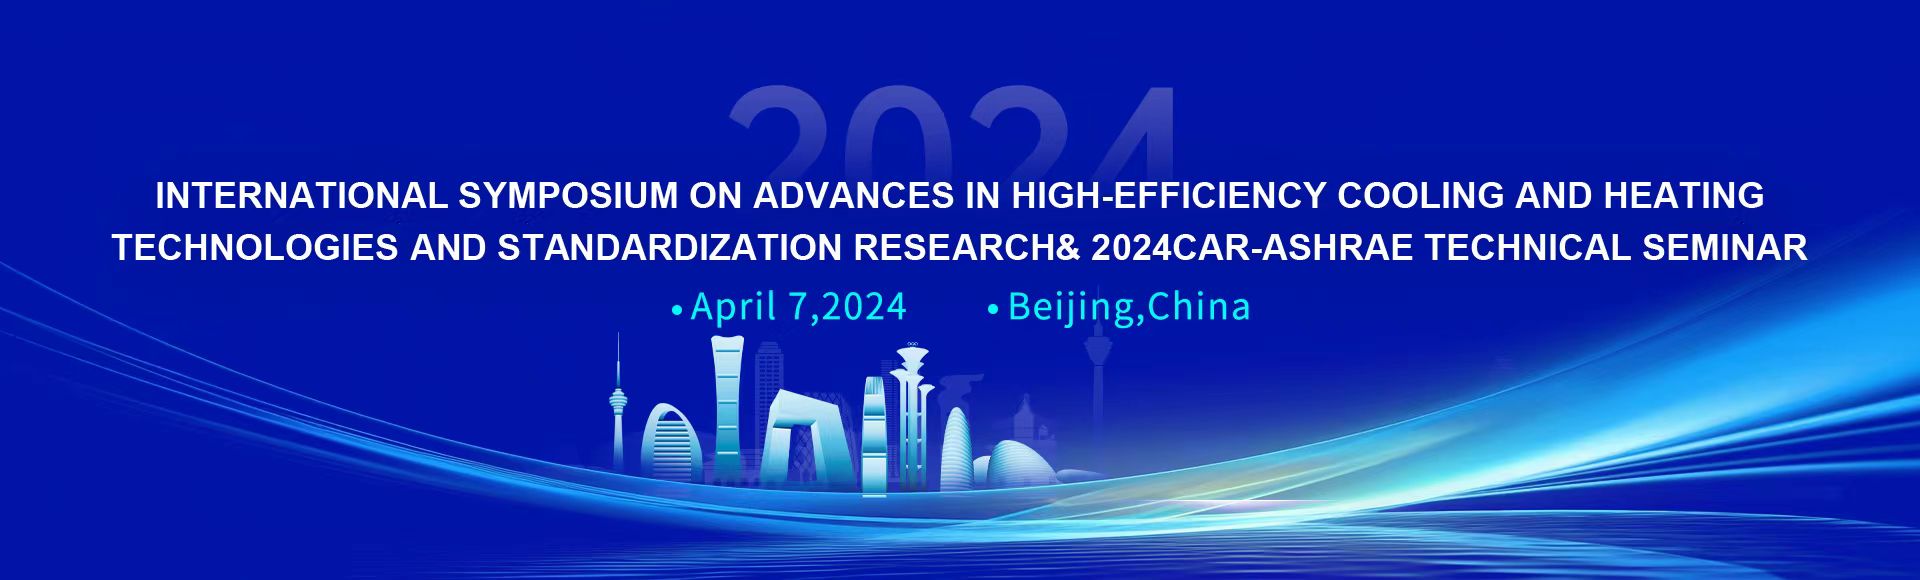 2024 International Symposium on Advances in High-Efficiency Cooling and Heating Technologies and Standardization Research& 2024CAR-ASHRAE Technical Seminar